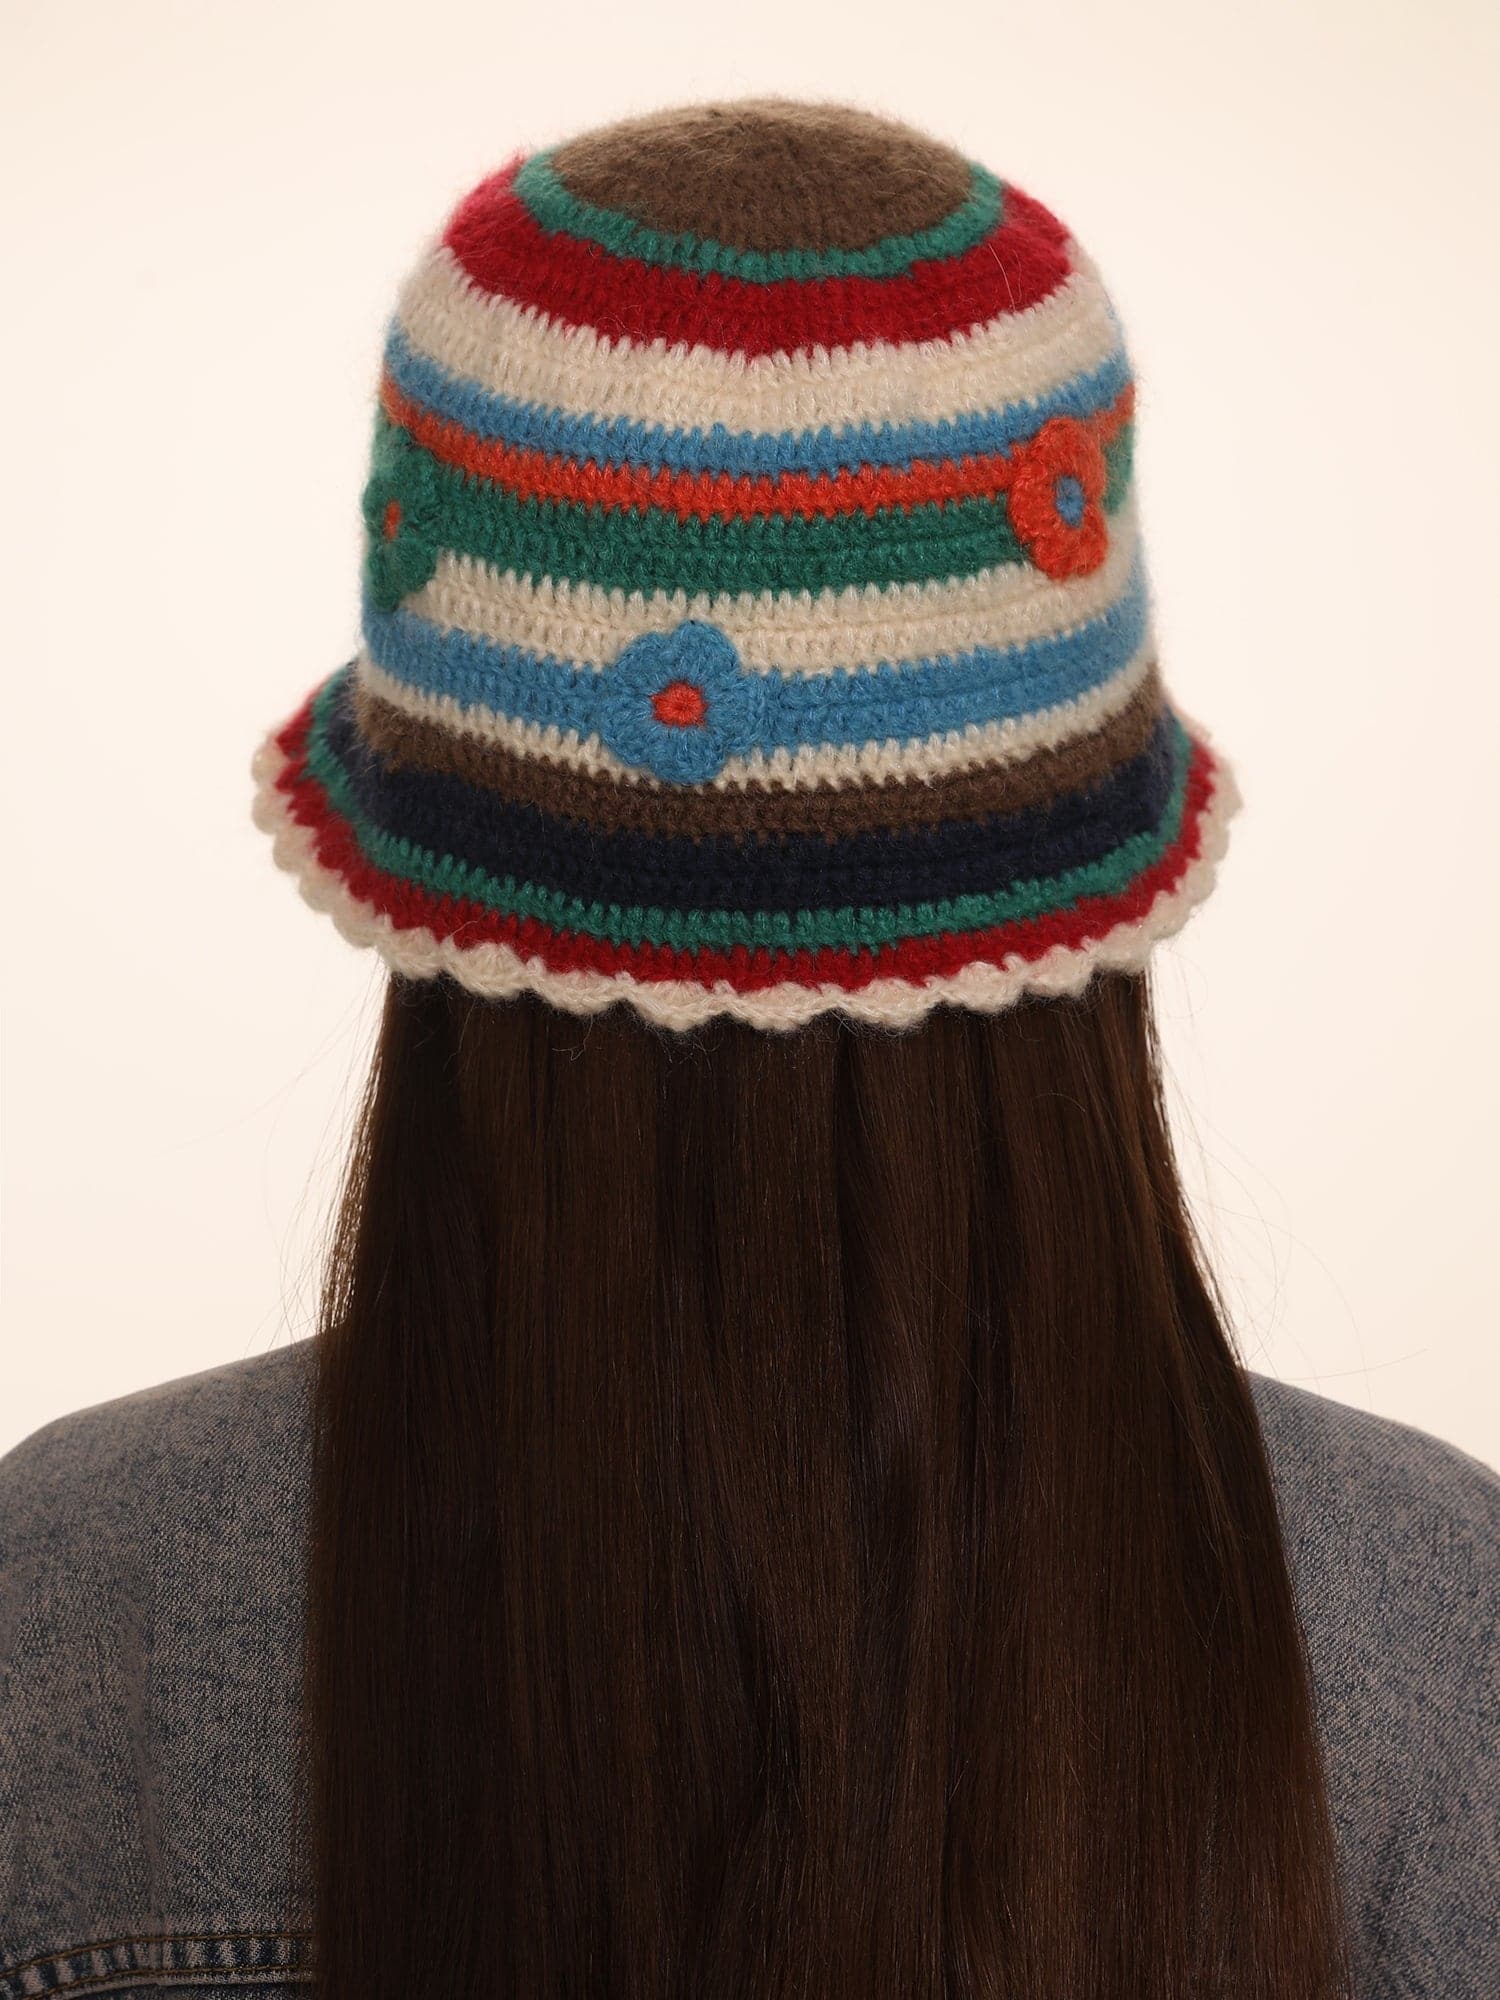 Striped Wool Fisherman Hat With Floral Accents - chiclara